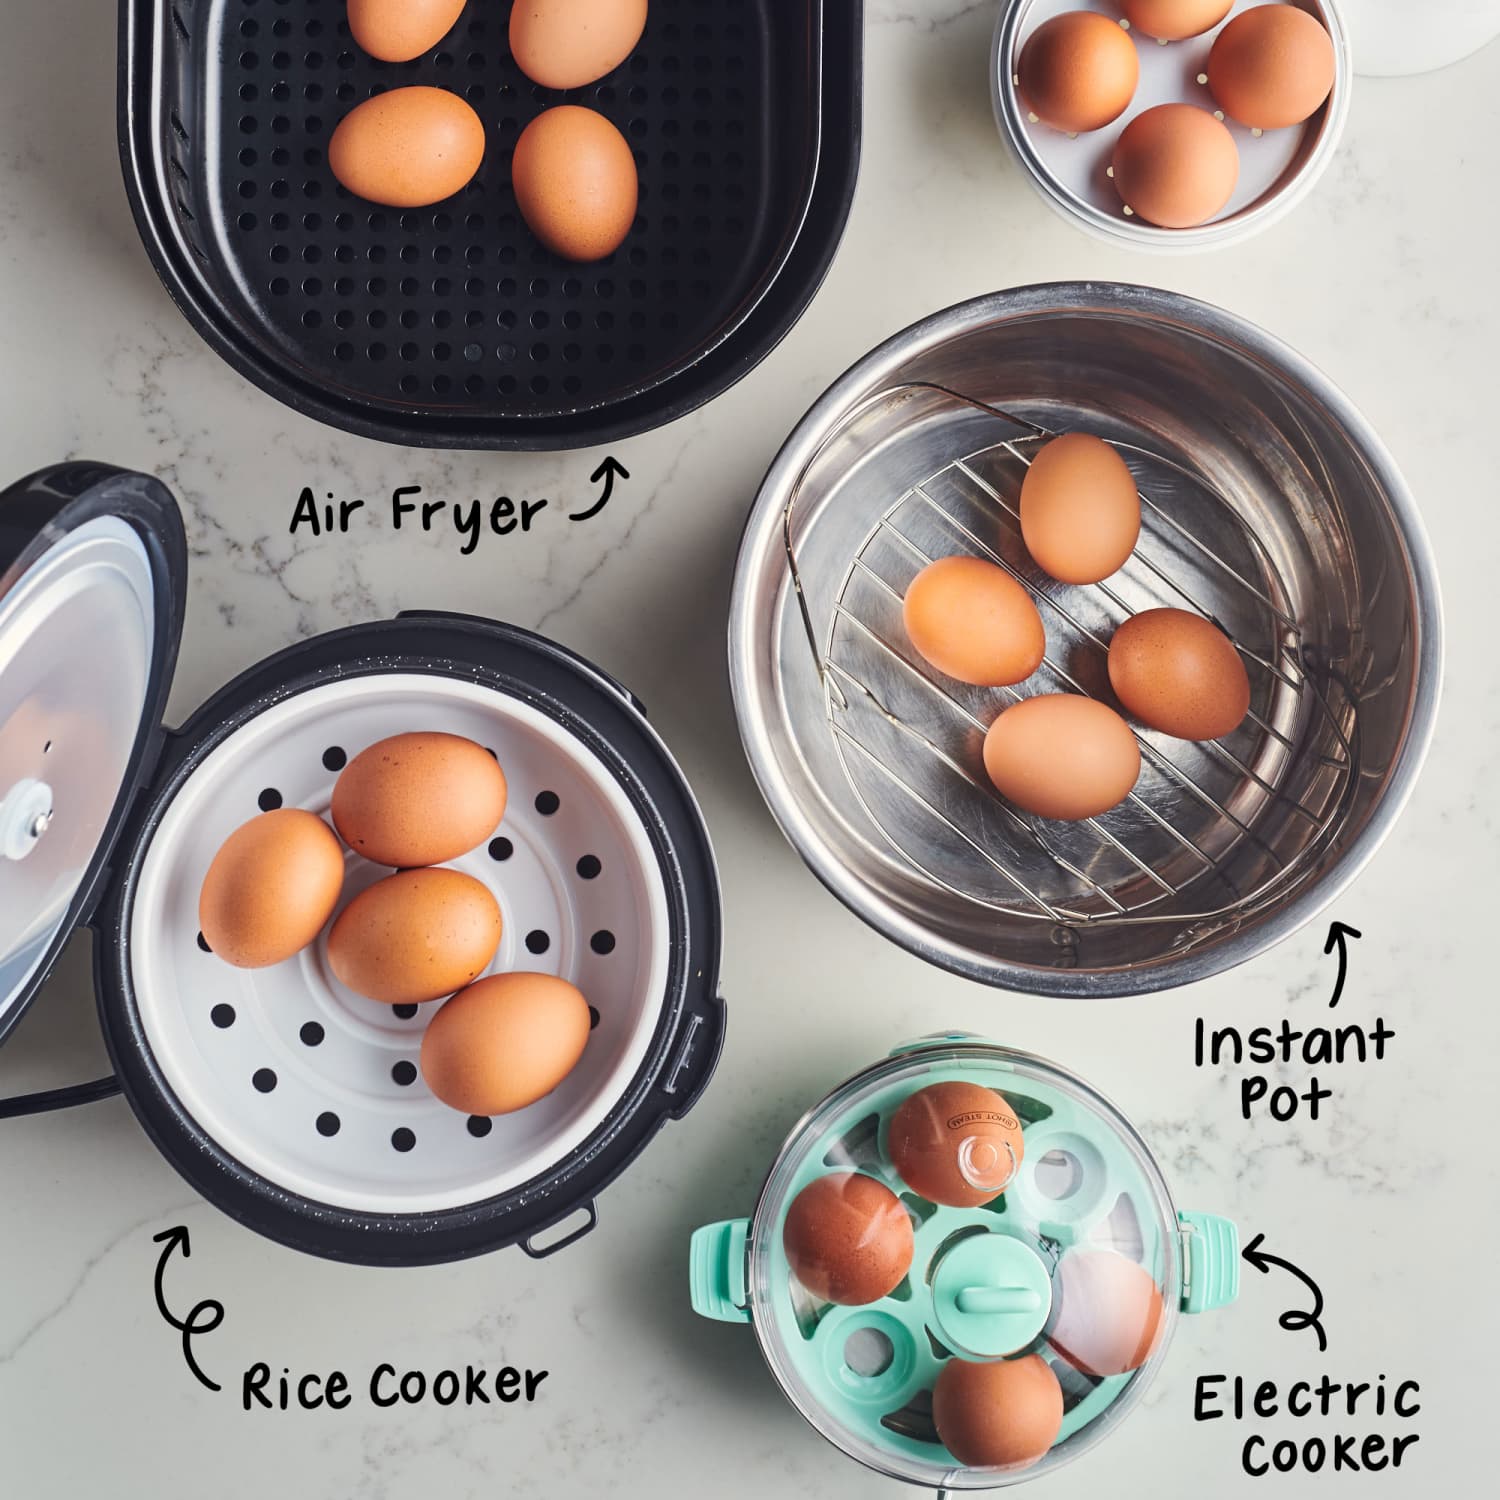 The Best Gadget for Making Hard-Boiled Eggs